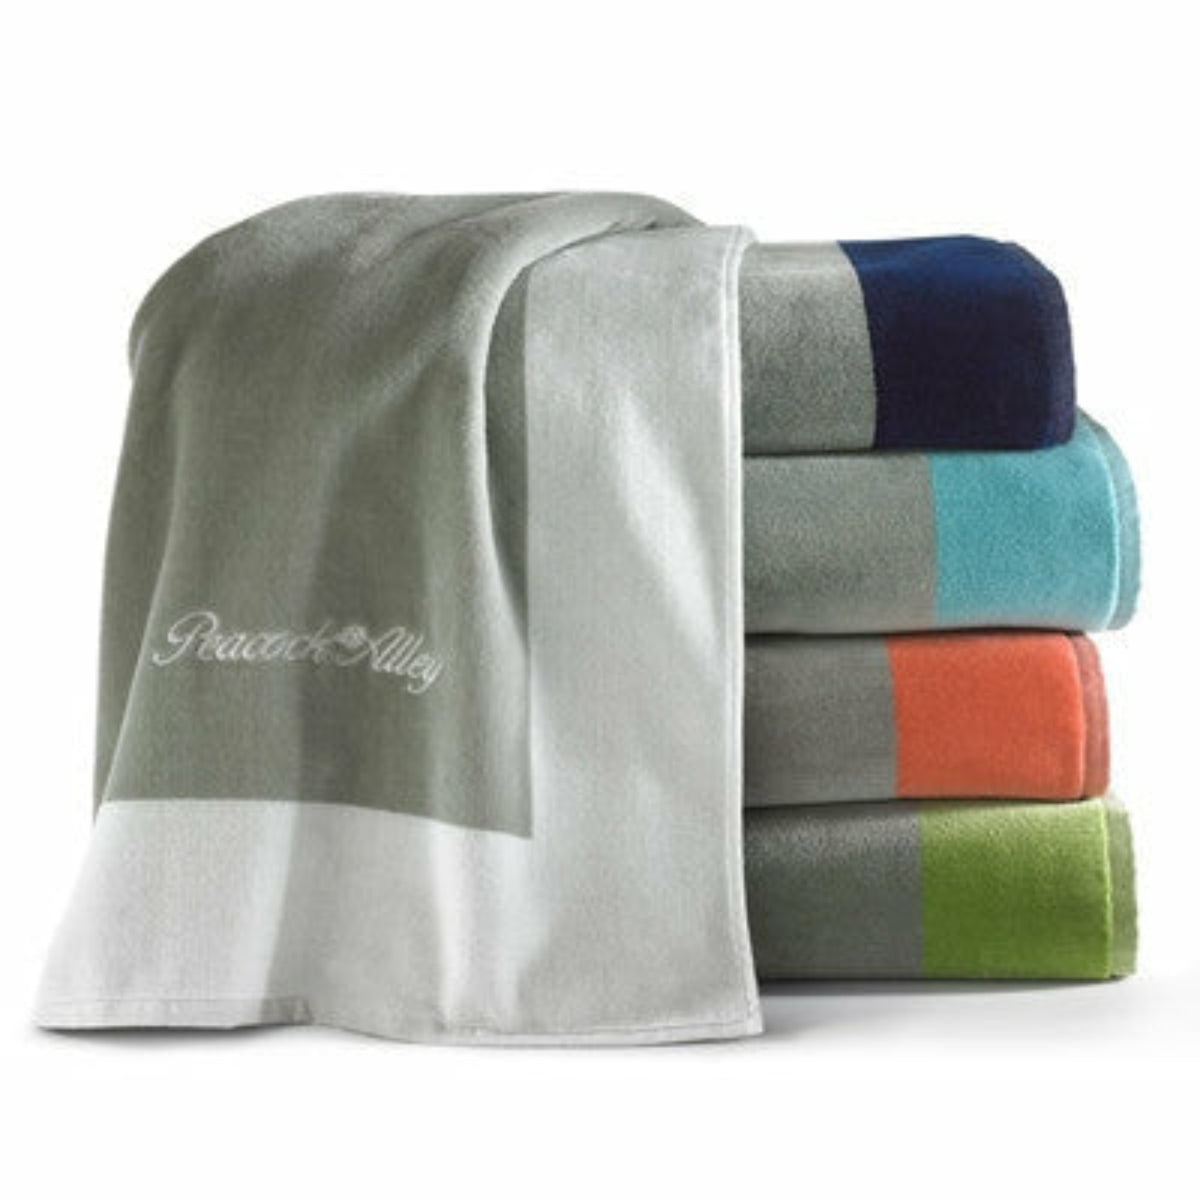 Peacock Alley Soleil Beach Towels Stack Fine Linens